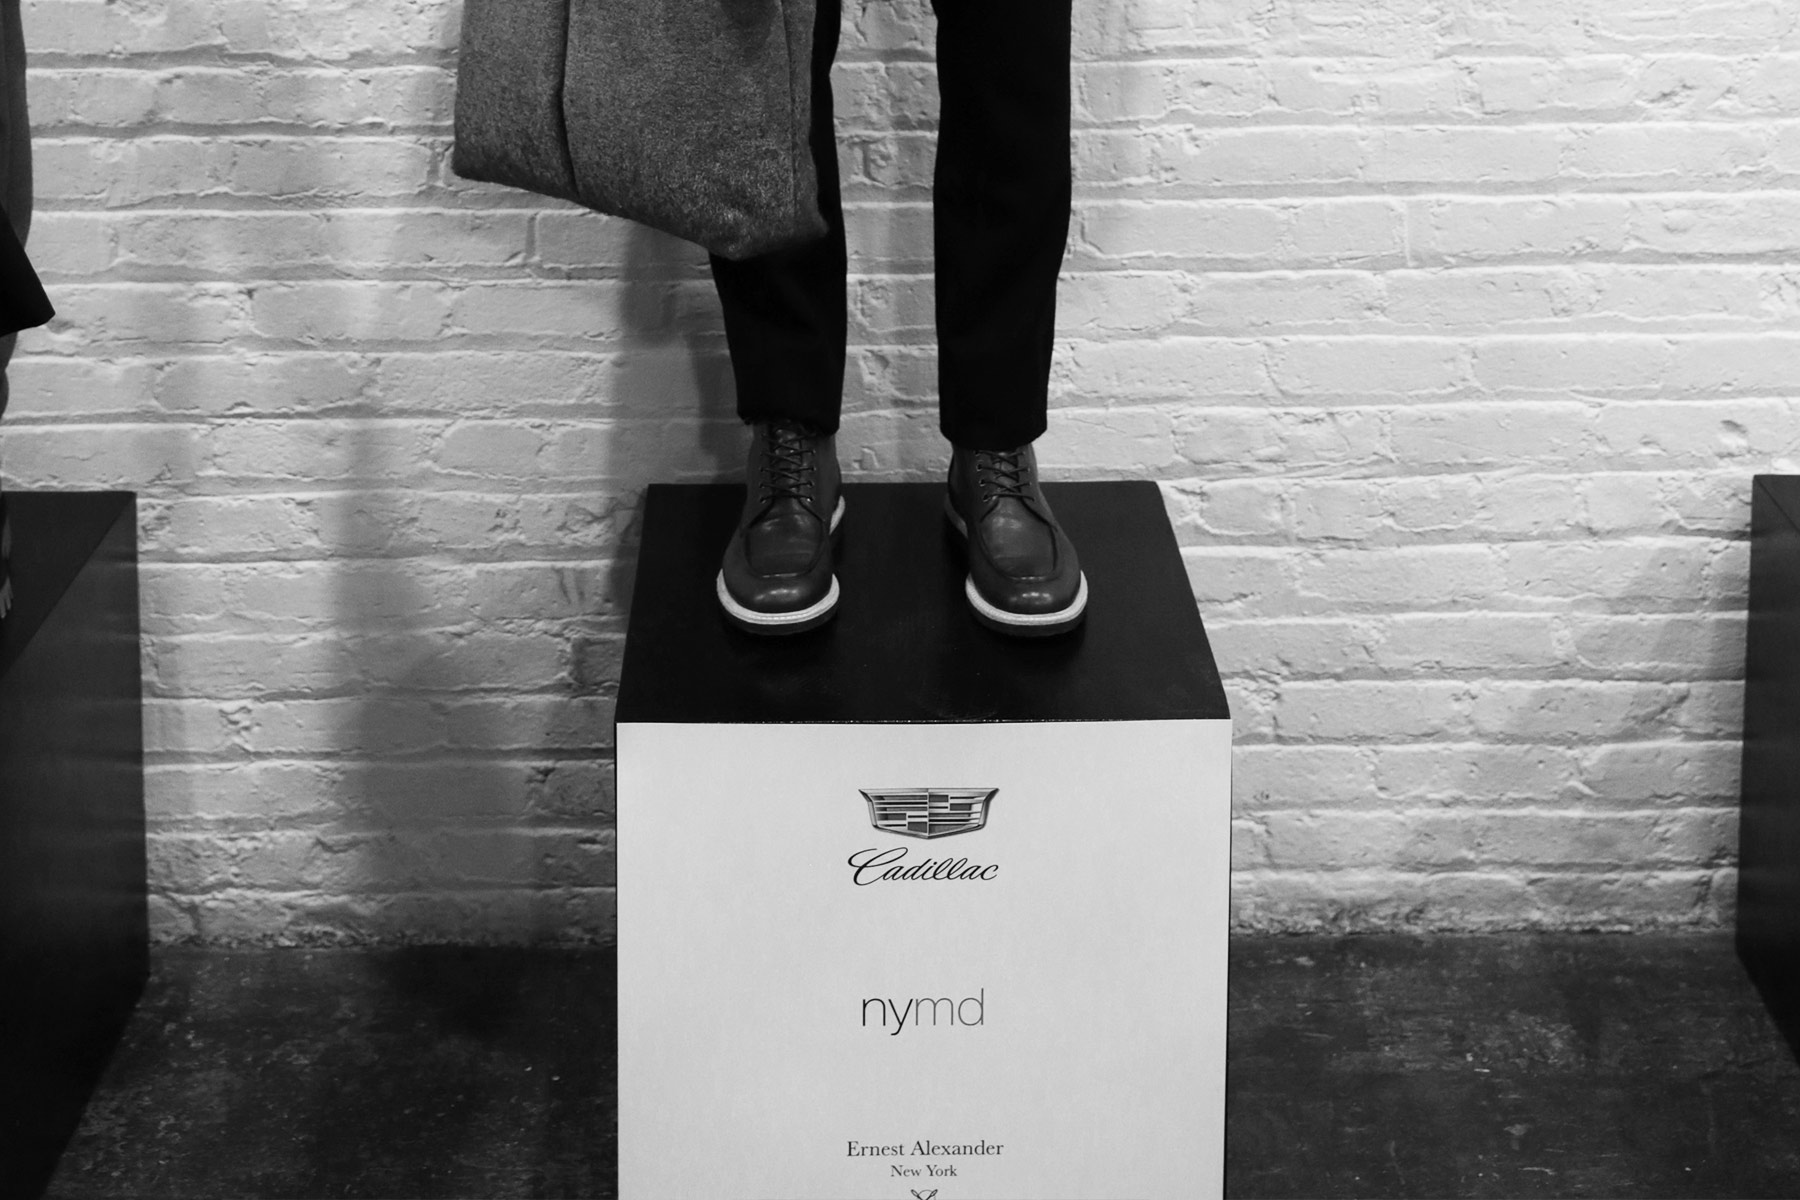 NYMD FW2015 Collections Presented by Cadillac